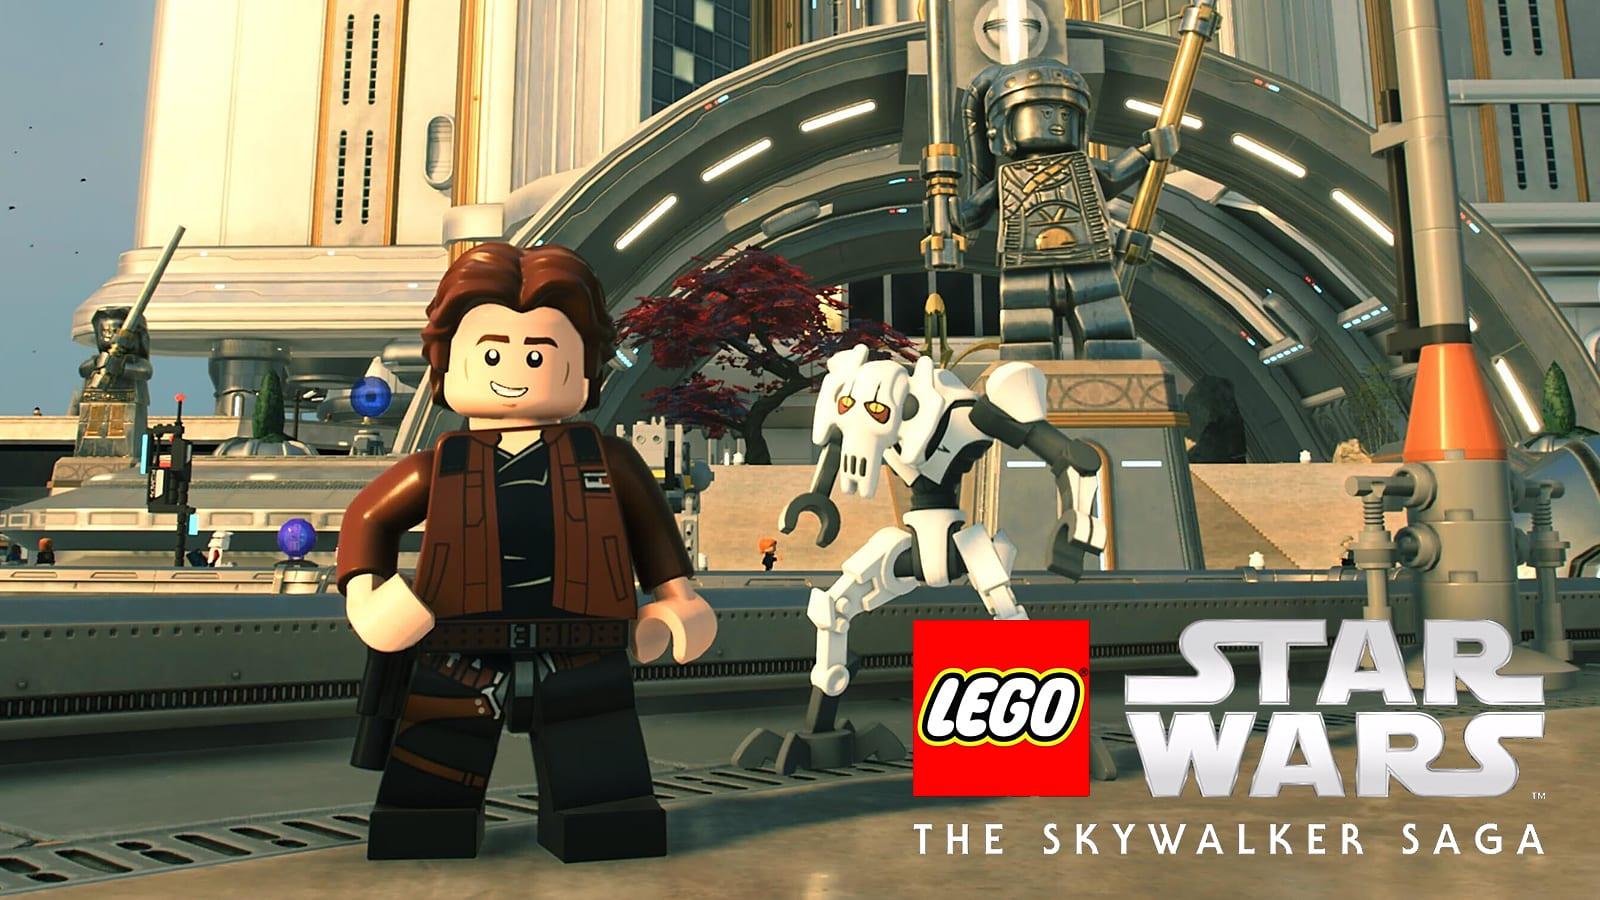 Han Solo and General Grievous in LEGO Star Wars: The Skywalker Saga